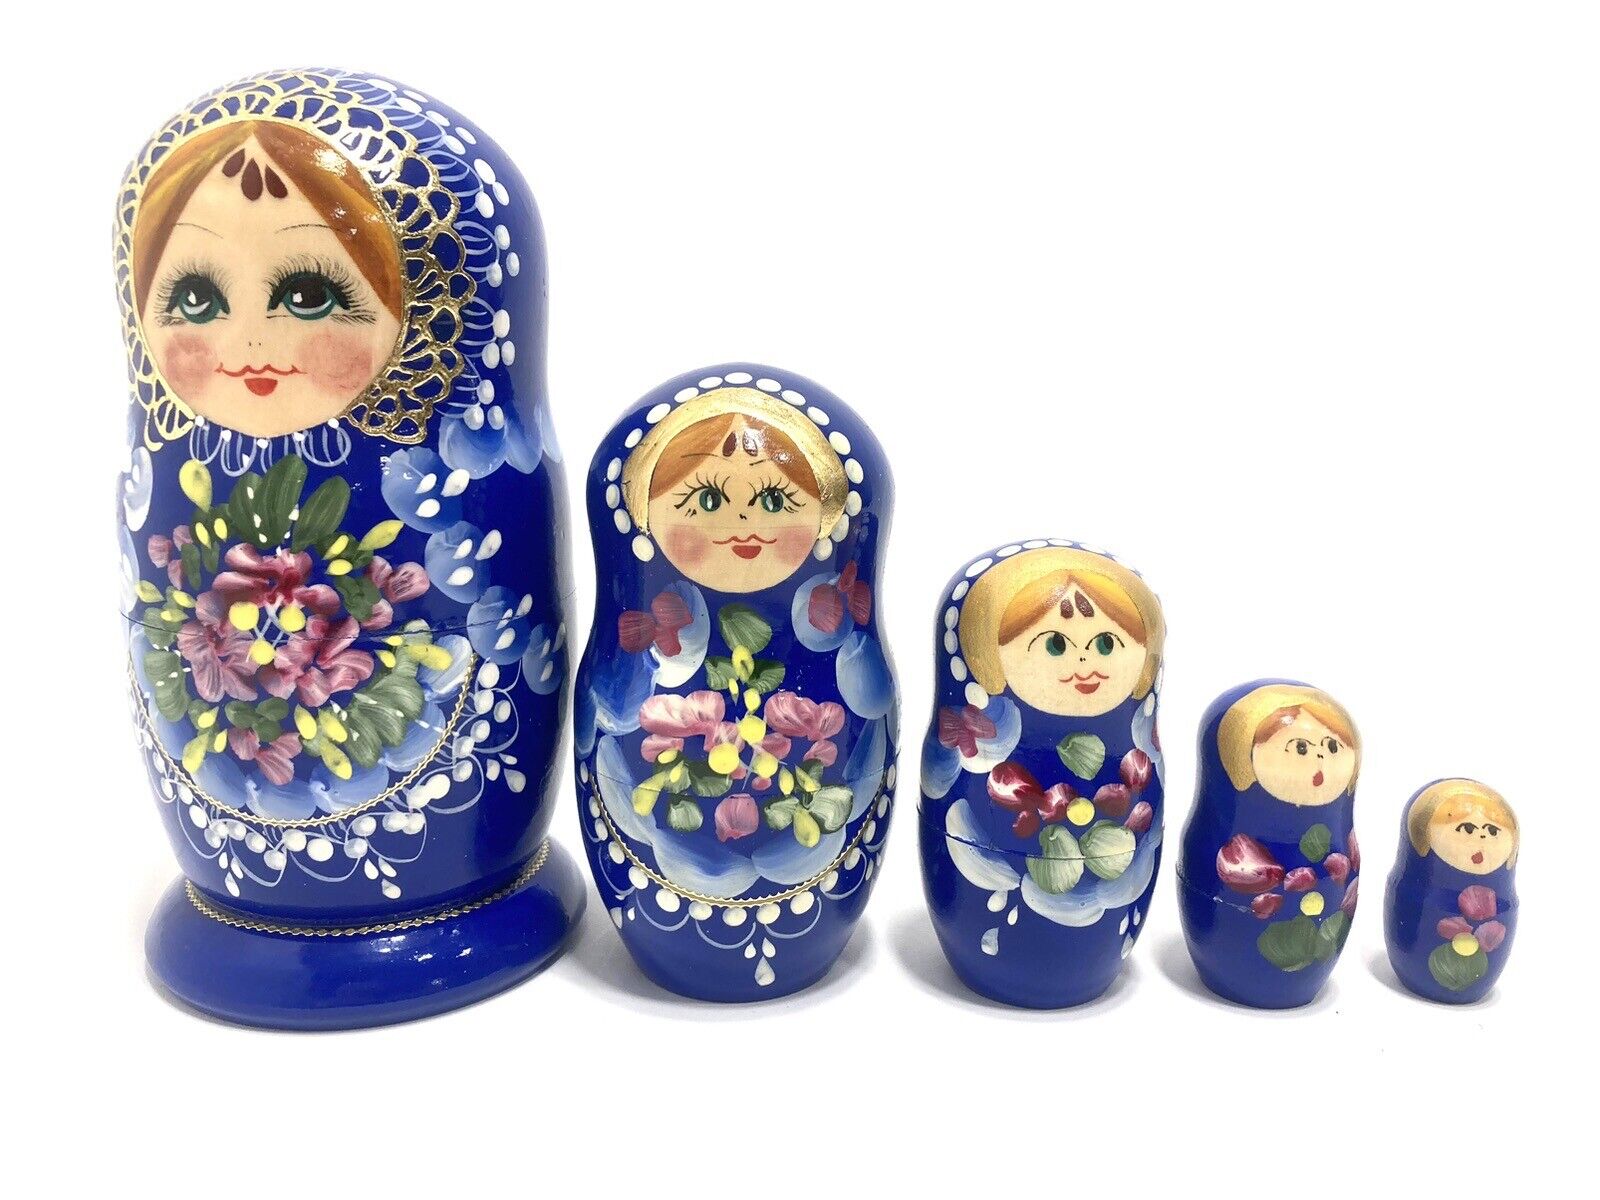 Russian Matryoshka Nesting Dolls 5 Piece Hand Painted Gilded Wood Blue Floral